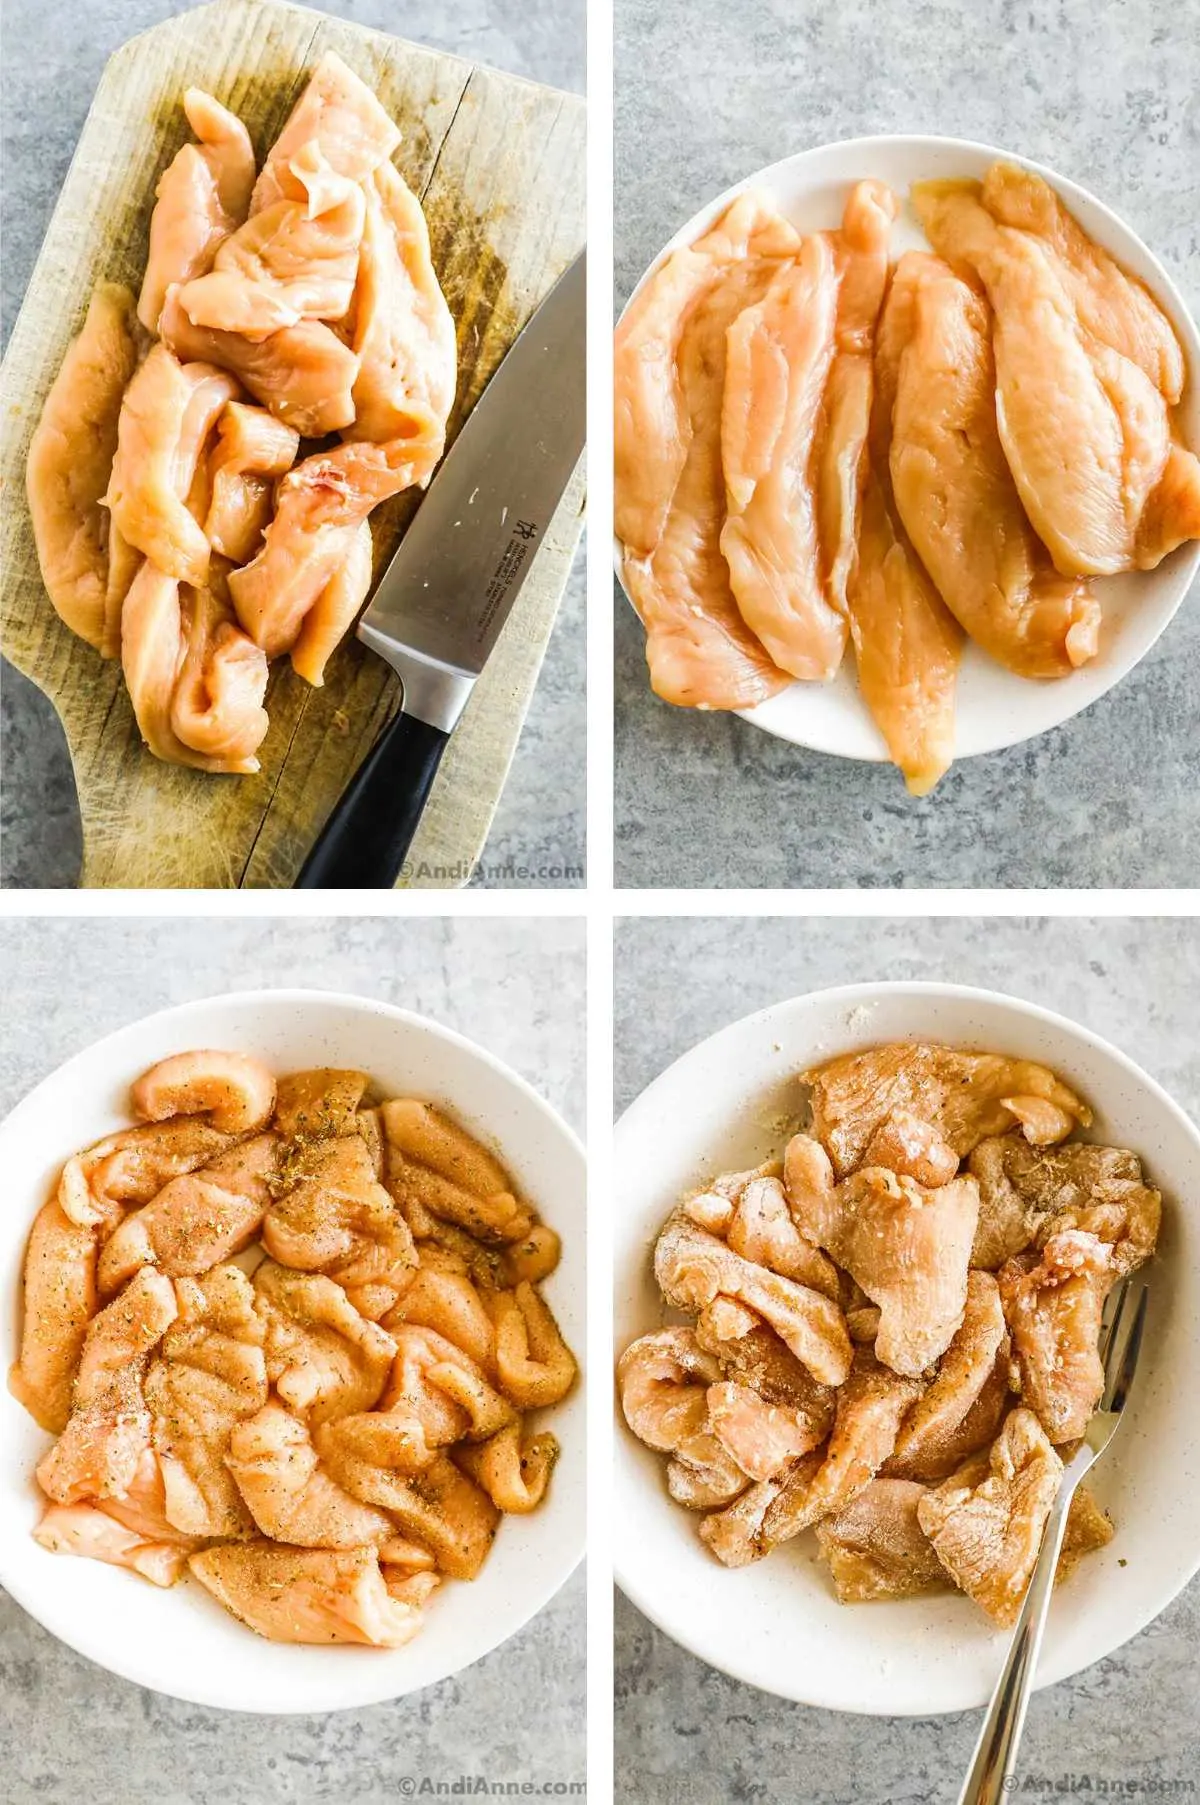 Four images in one: 1. Chicken breast slices on a cutting board with a knife to the right. 2. Sliced Chicken breast on a white plate. 3. Sliced chicken in a bowl with salt and pepper and Italian seasoning. 4. Flour is added to the chicken and a fork rests to the side. 